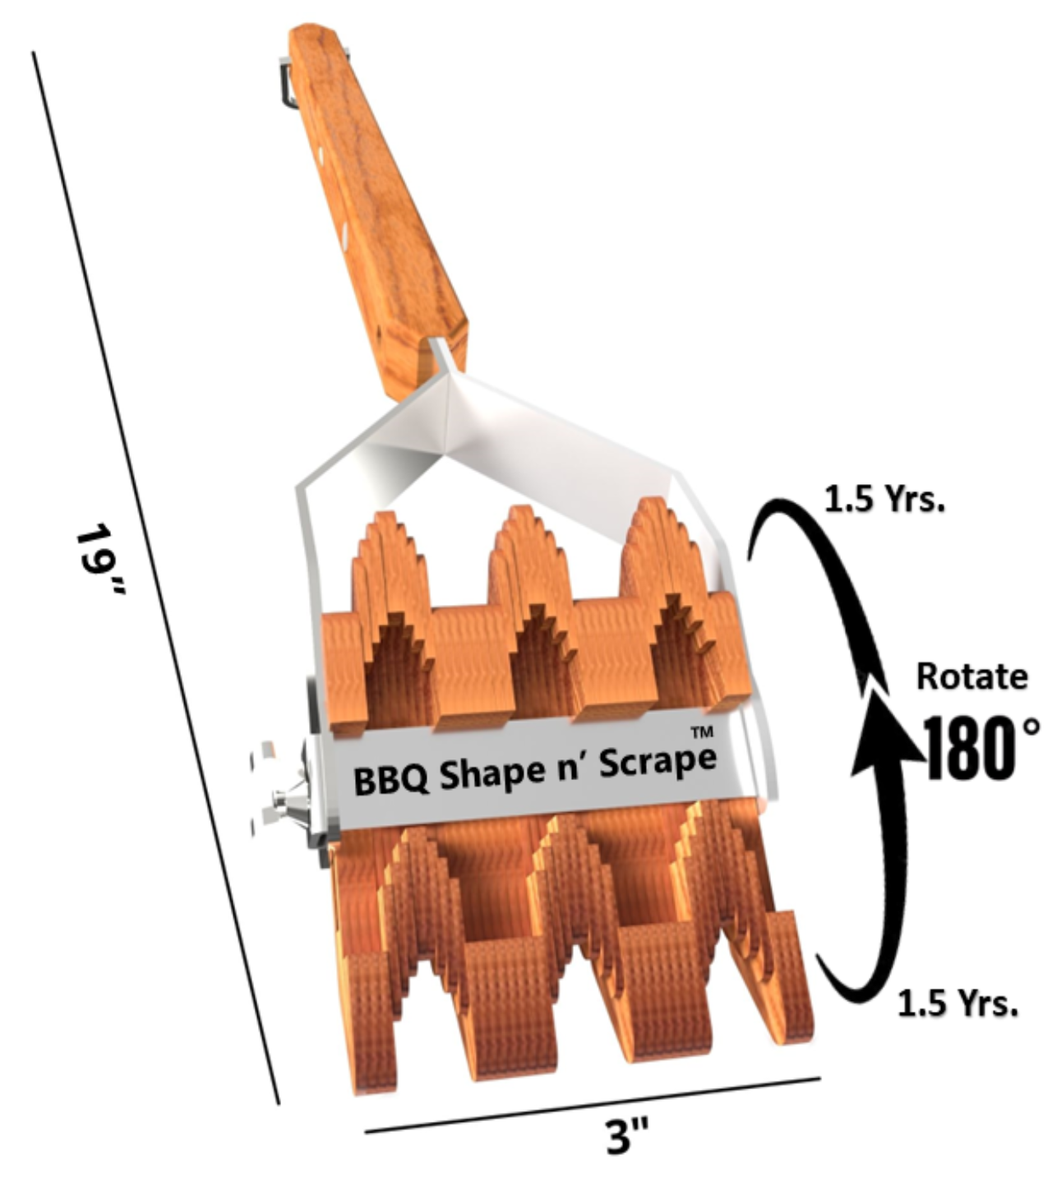 BBQ Lovers you will LOVE this Wooden BBQ Scraper. The BBQ Scraper redefines the very essence of safety when cleaning grill grates. The wooden BBQ Scraper offers safety and satisfaction seamlessly. Bidding farewell to the dangerous wire BBQ brushes!